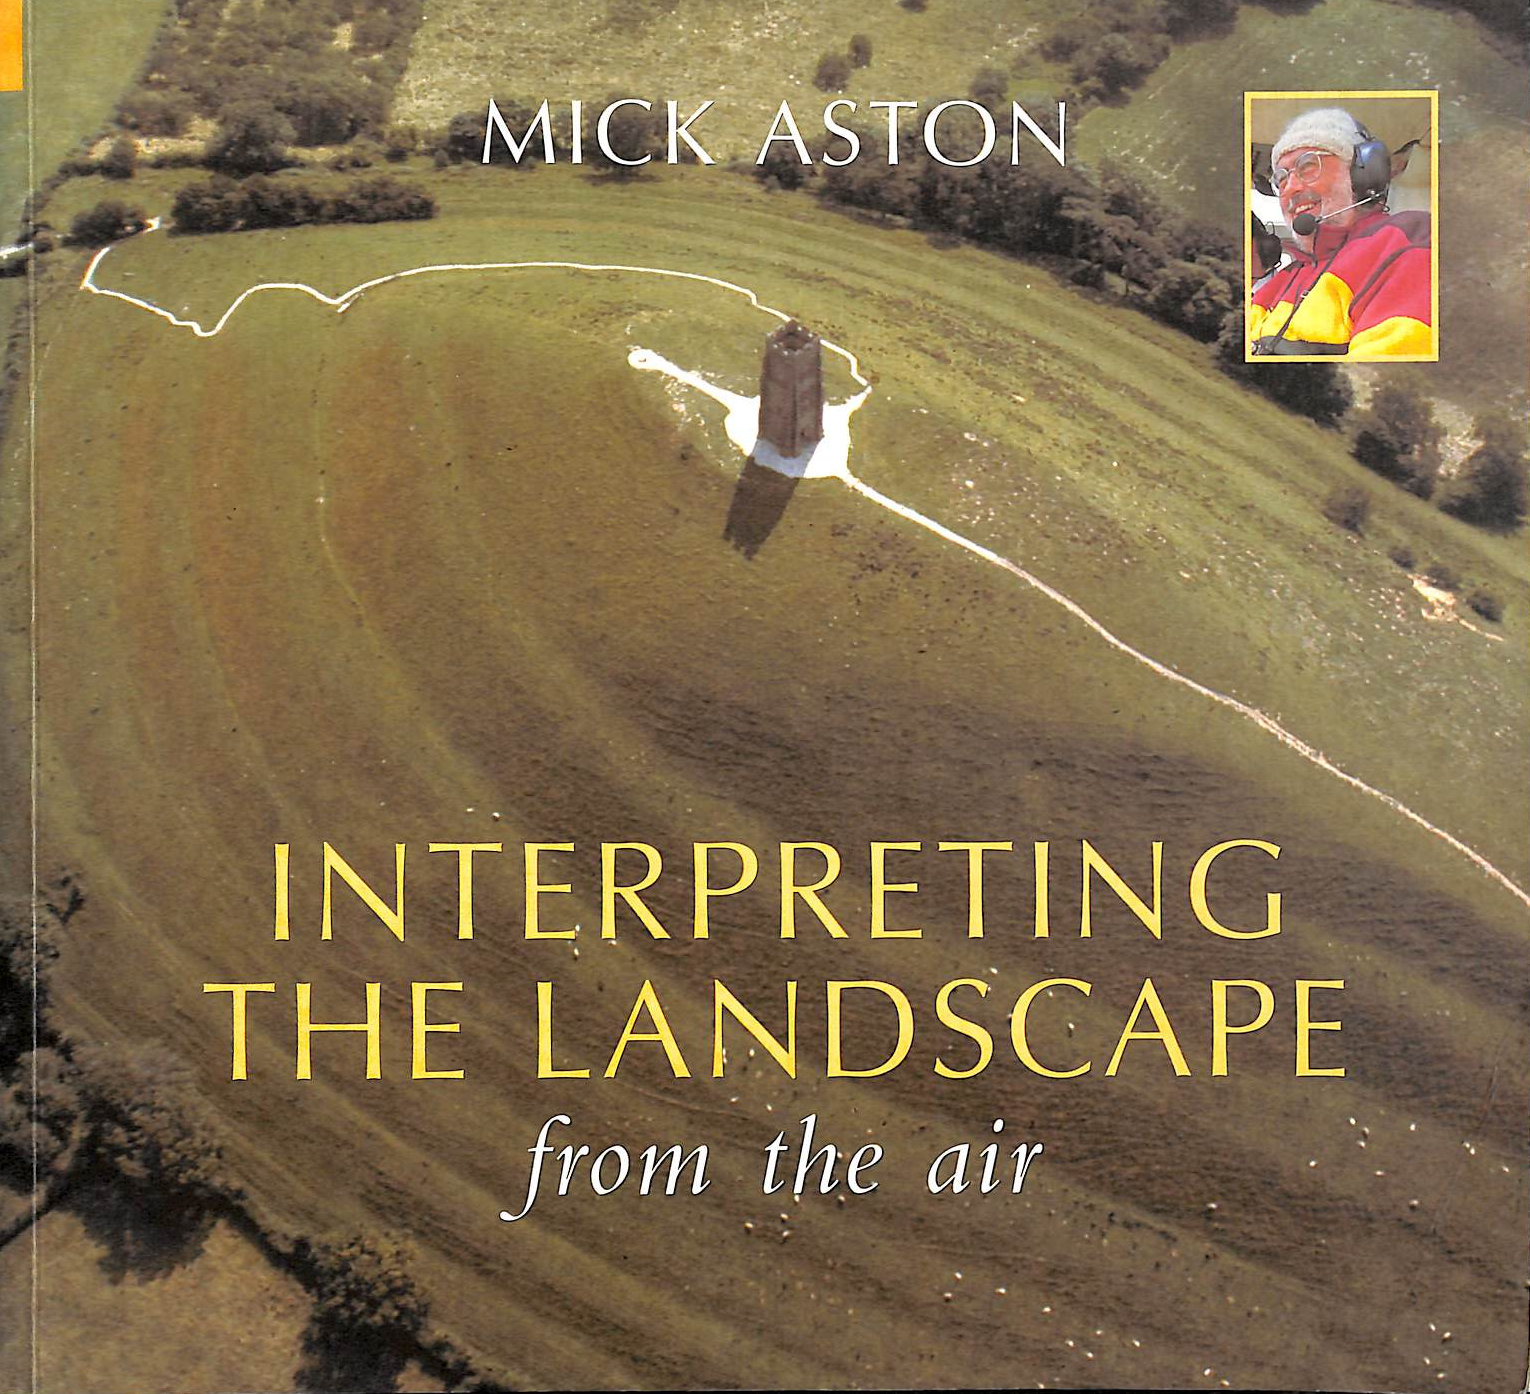 MICK ASTON - Interpreting the Landscape from the Air